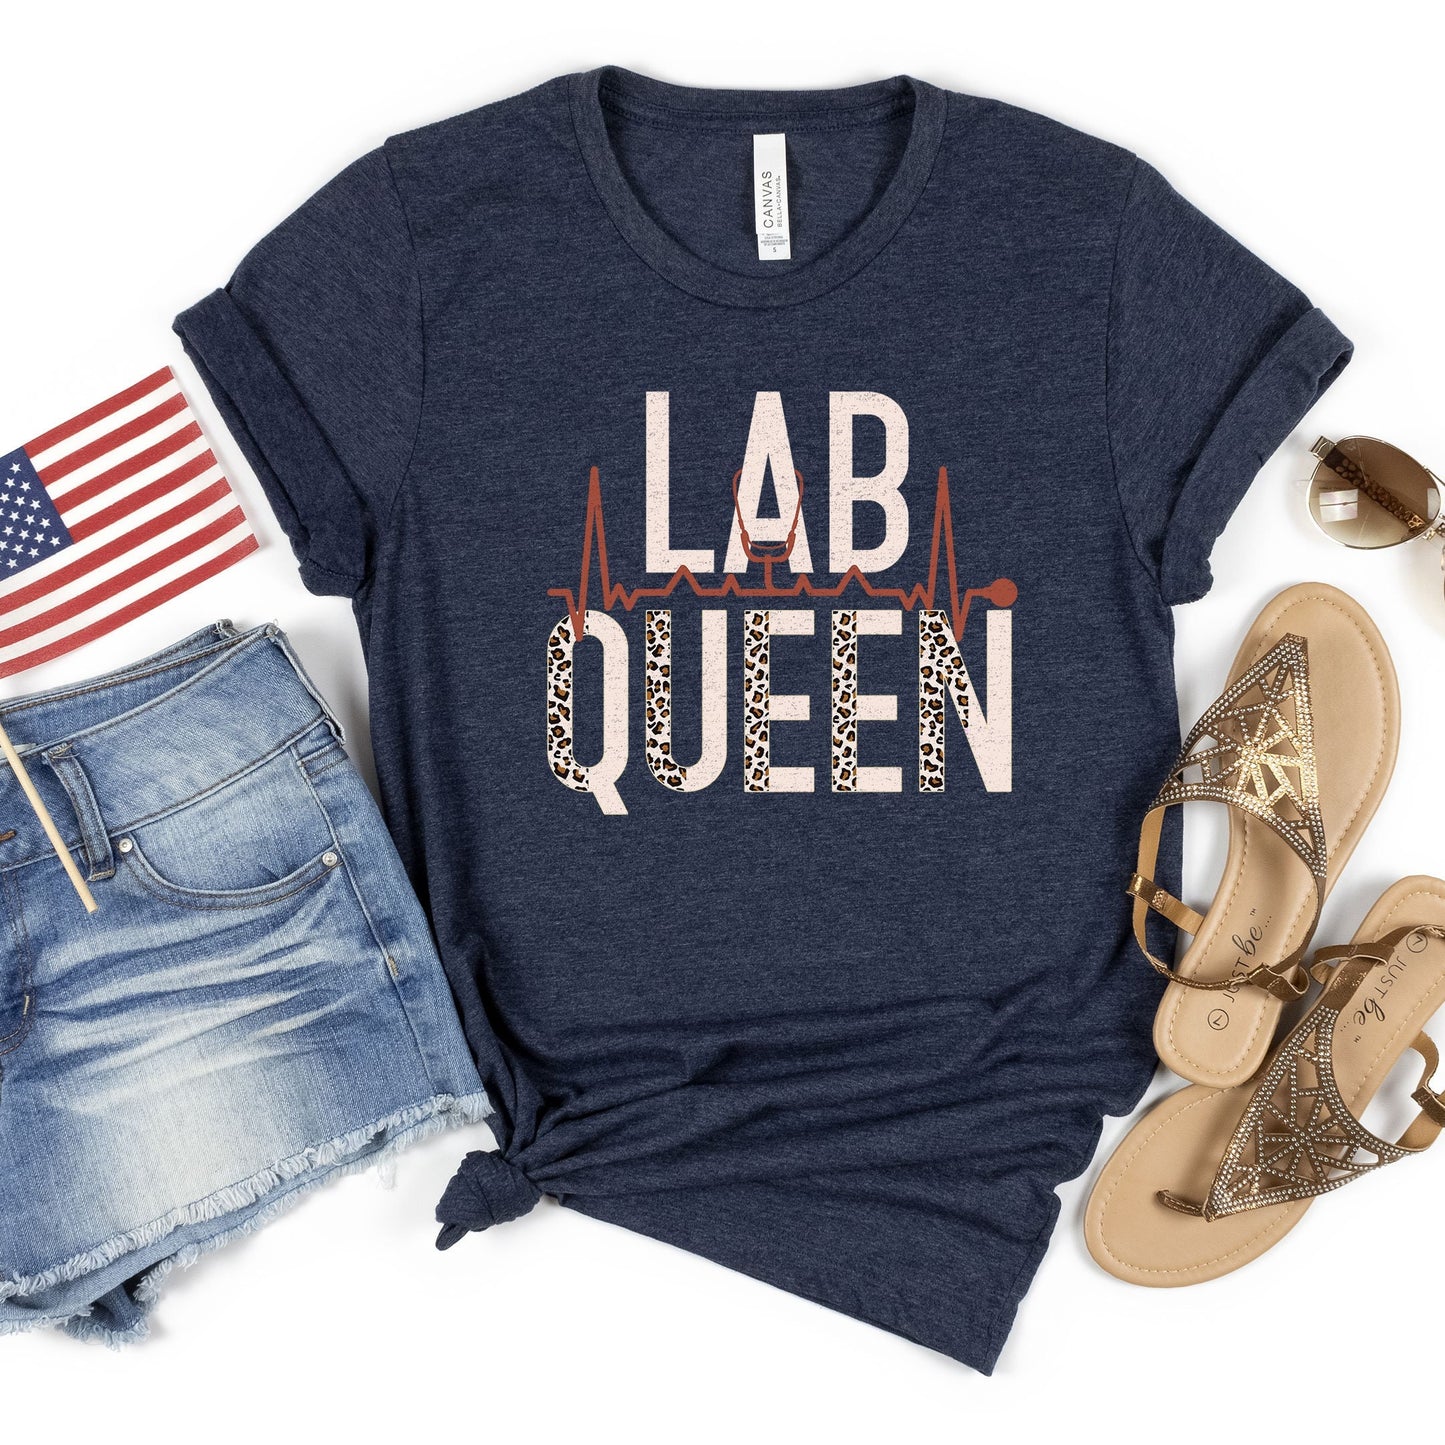 Lab Queen Shirt, Funny Science Shirt, Science Gift, Scientist Shirt, Lab Tech Shirt, Scientist Birthday Gift